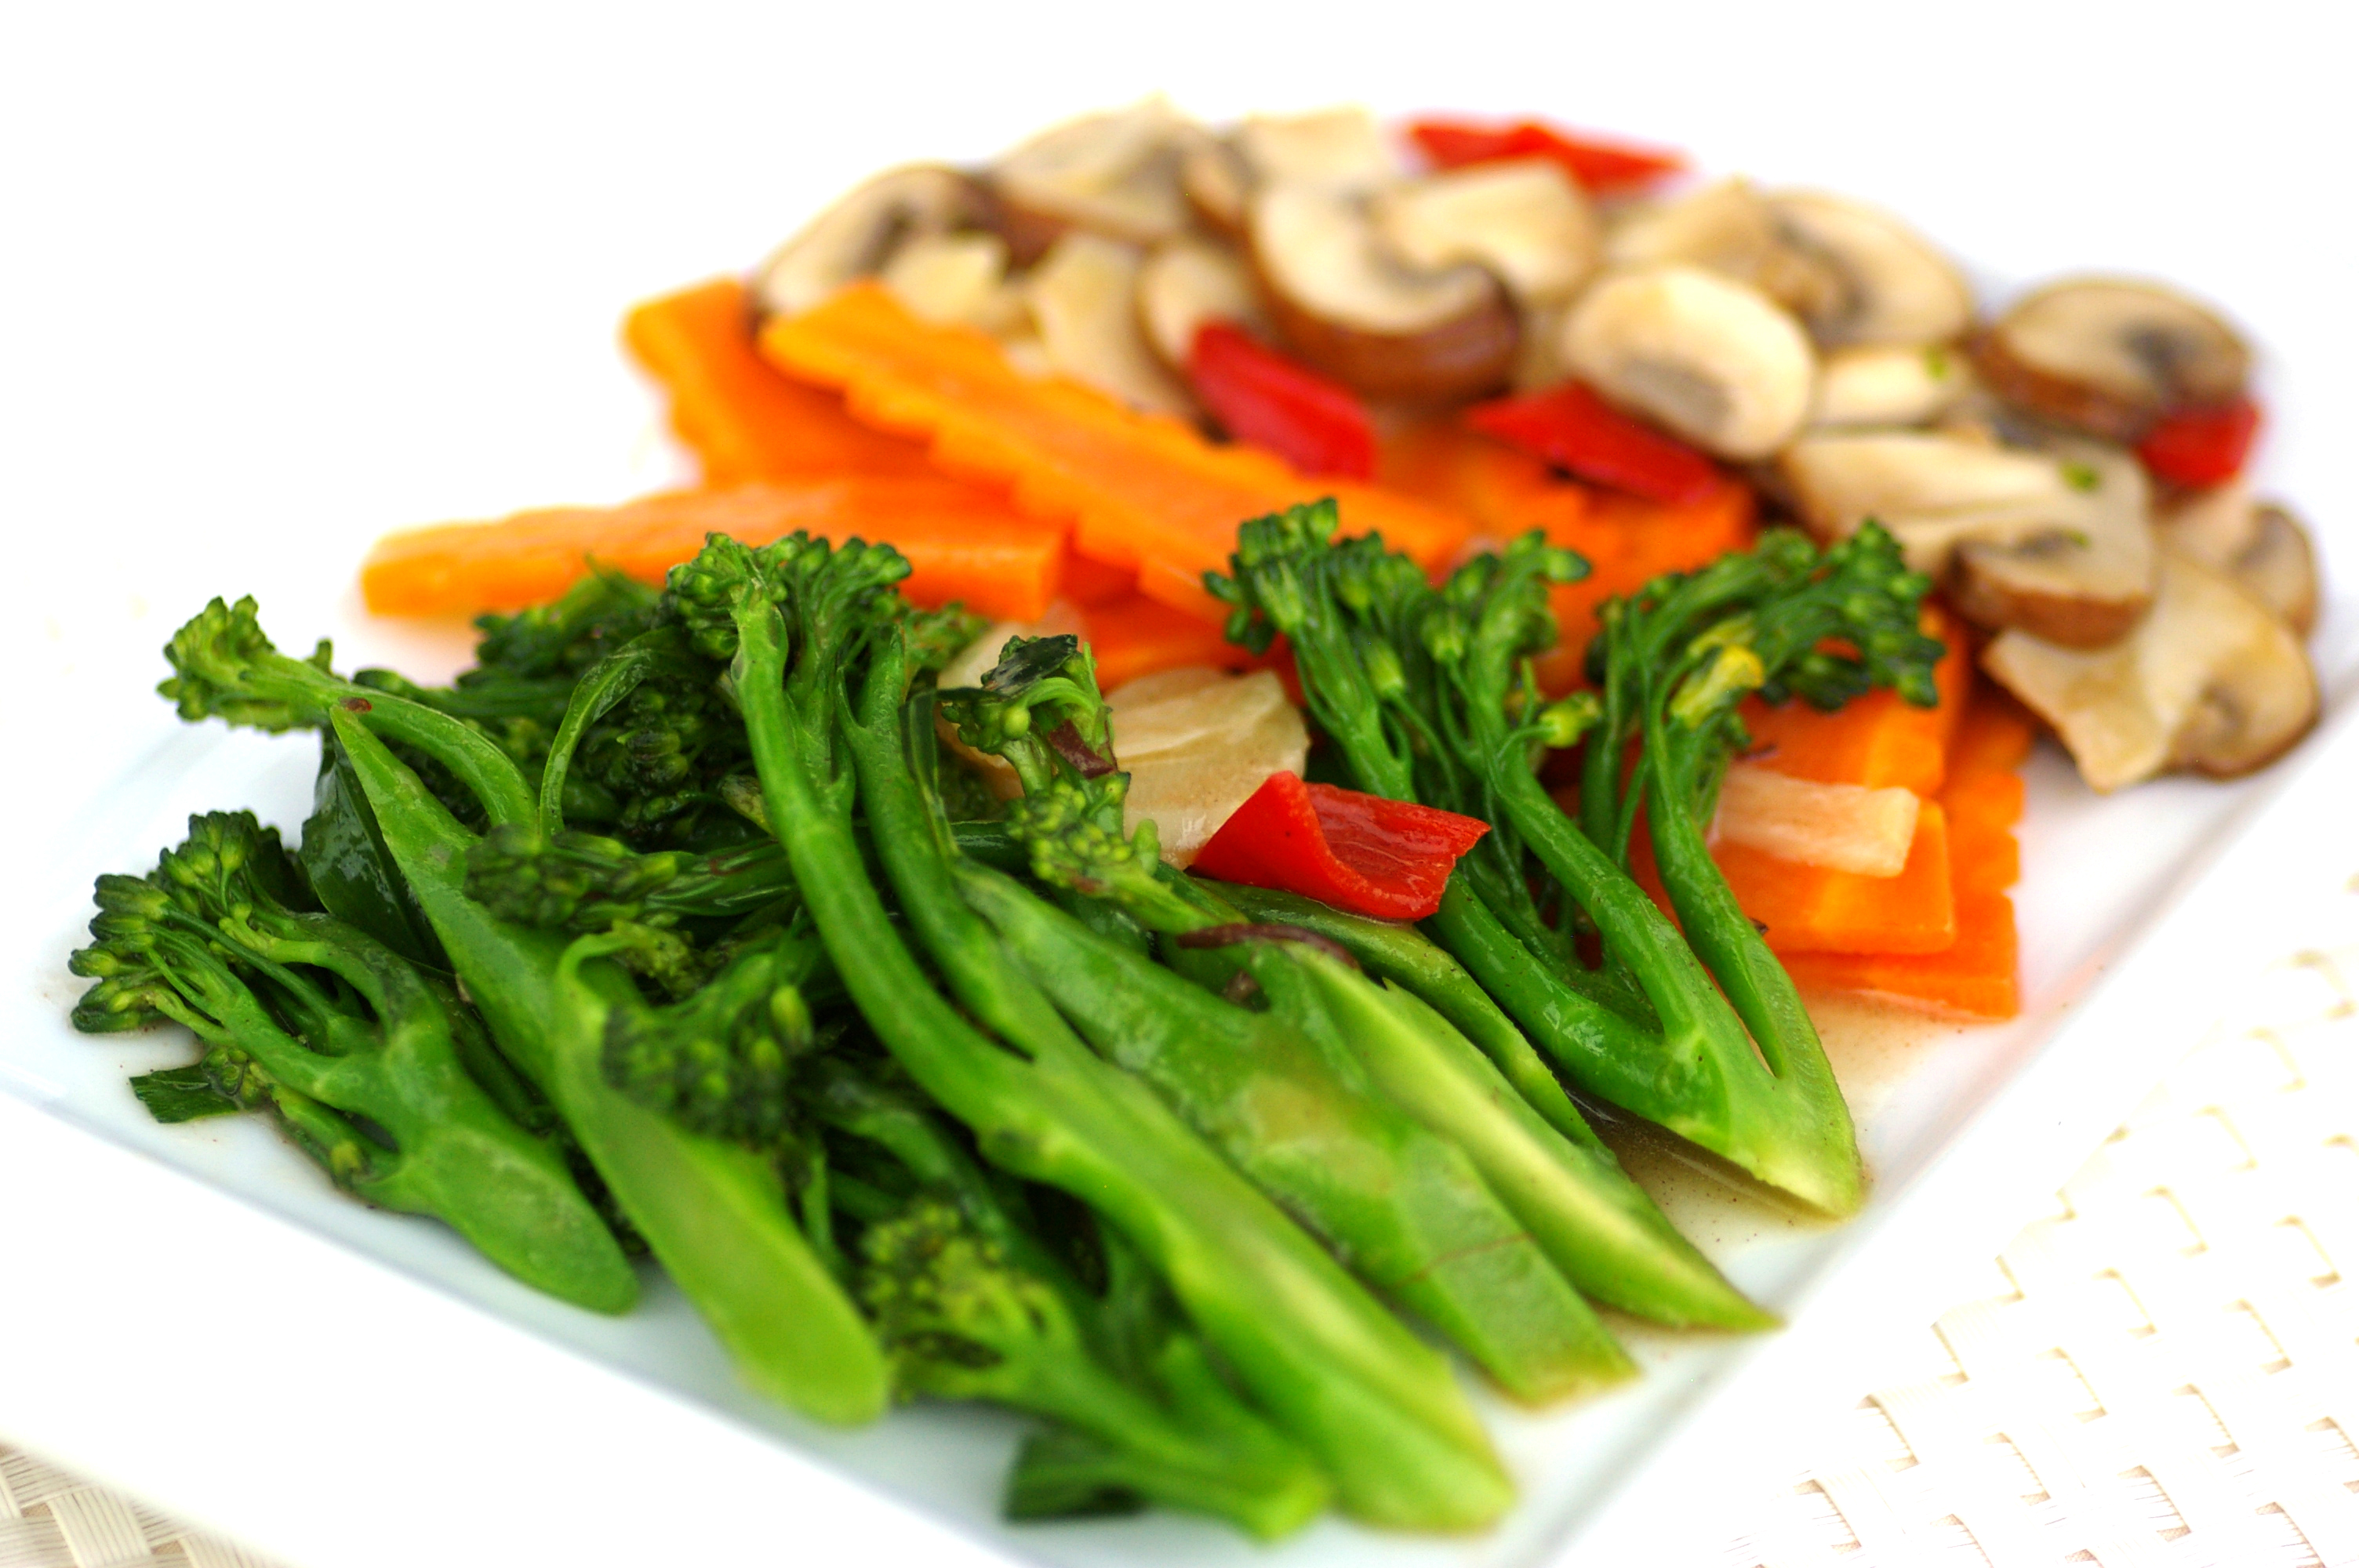 The Healthy Mix - stir fried vegetables